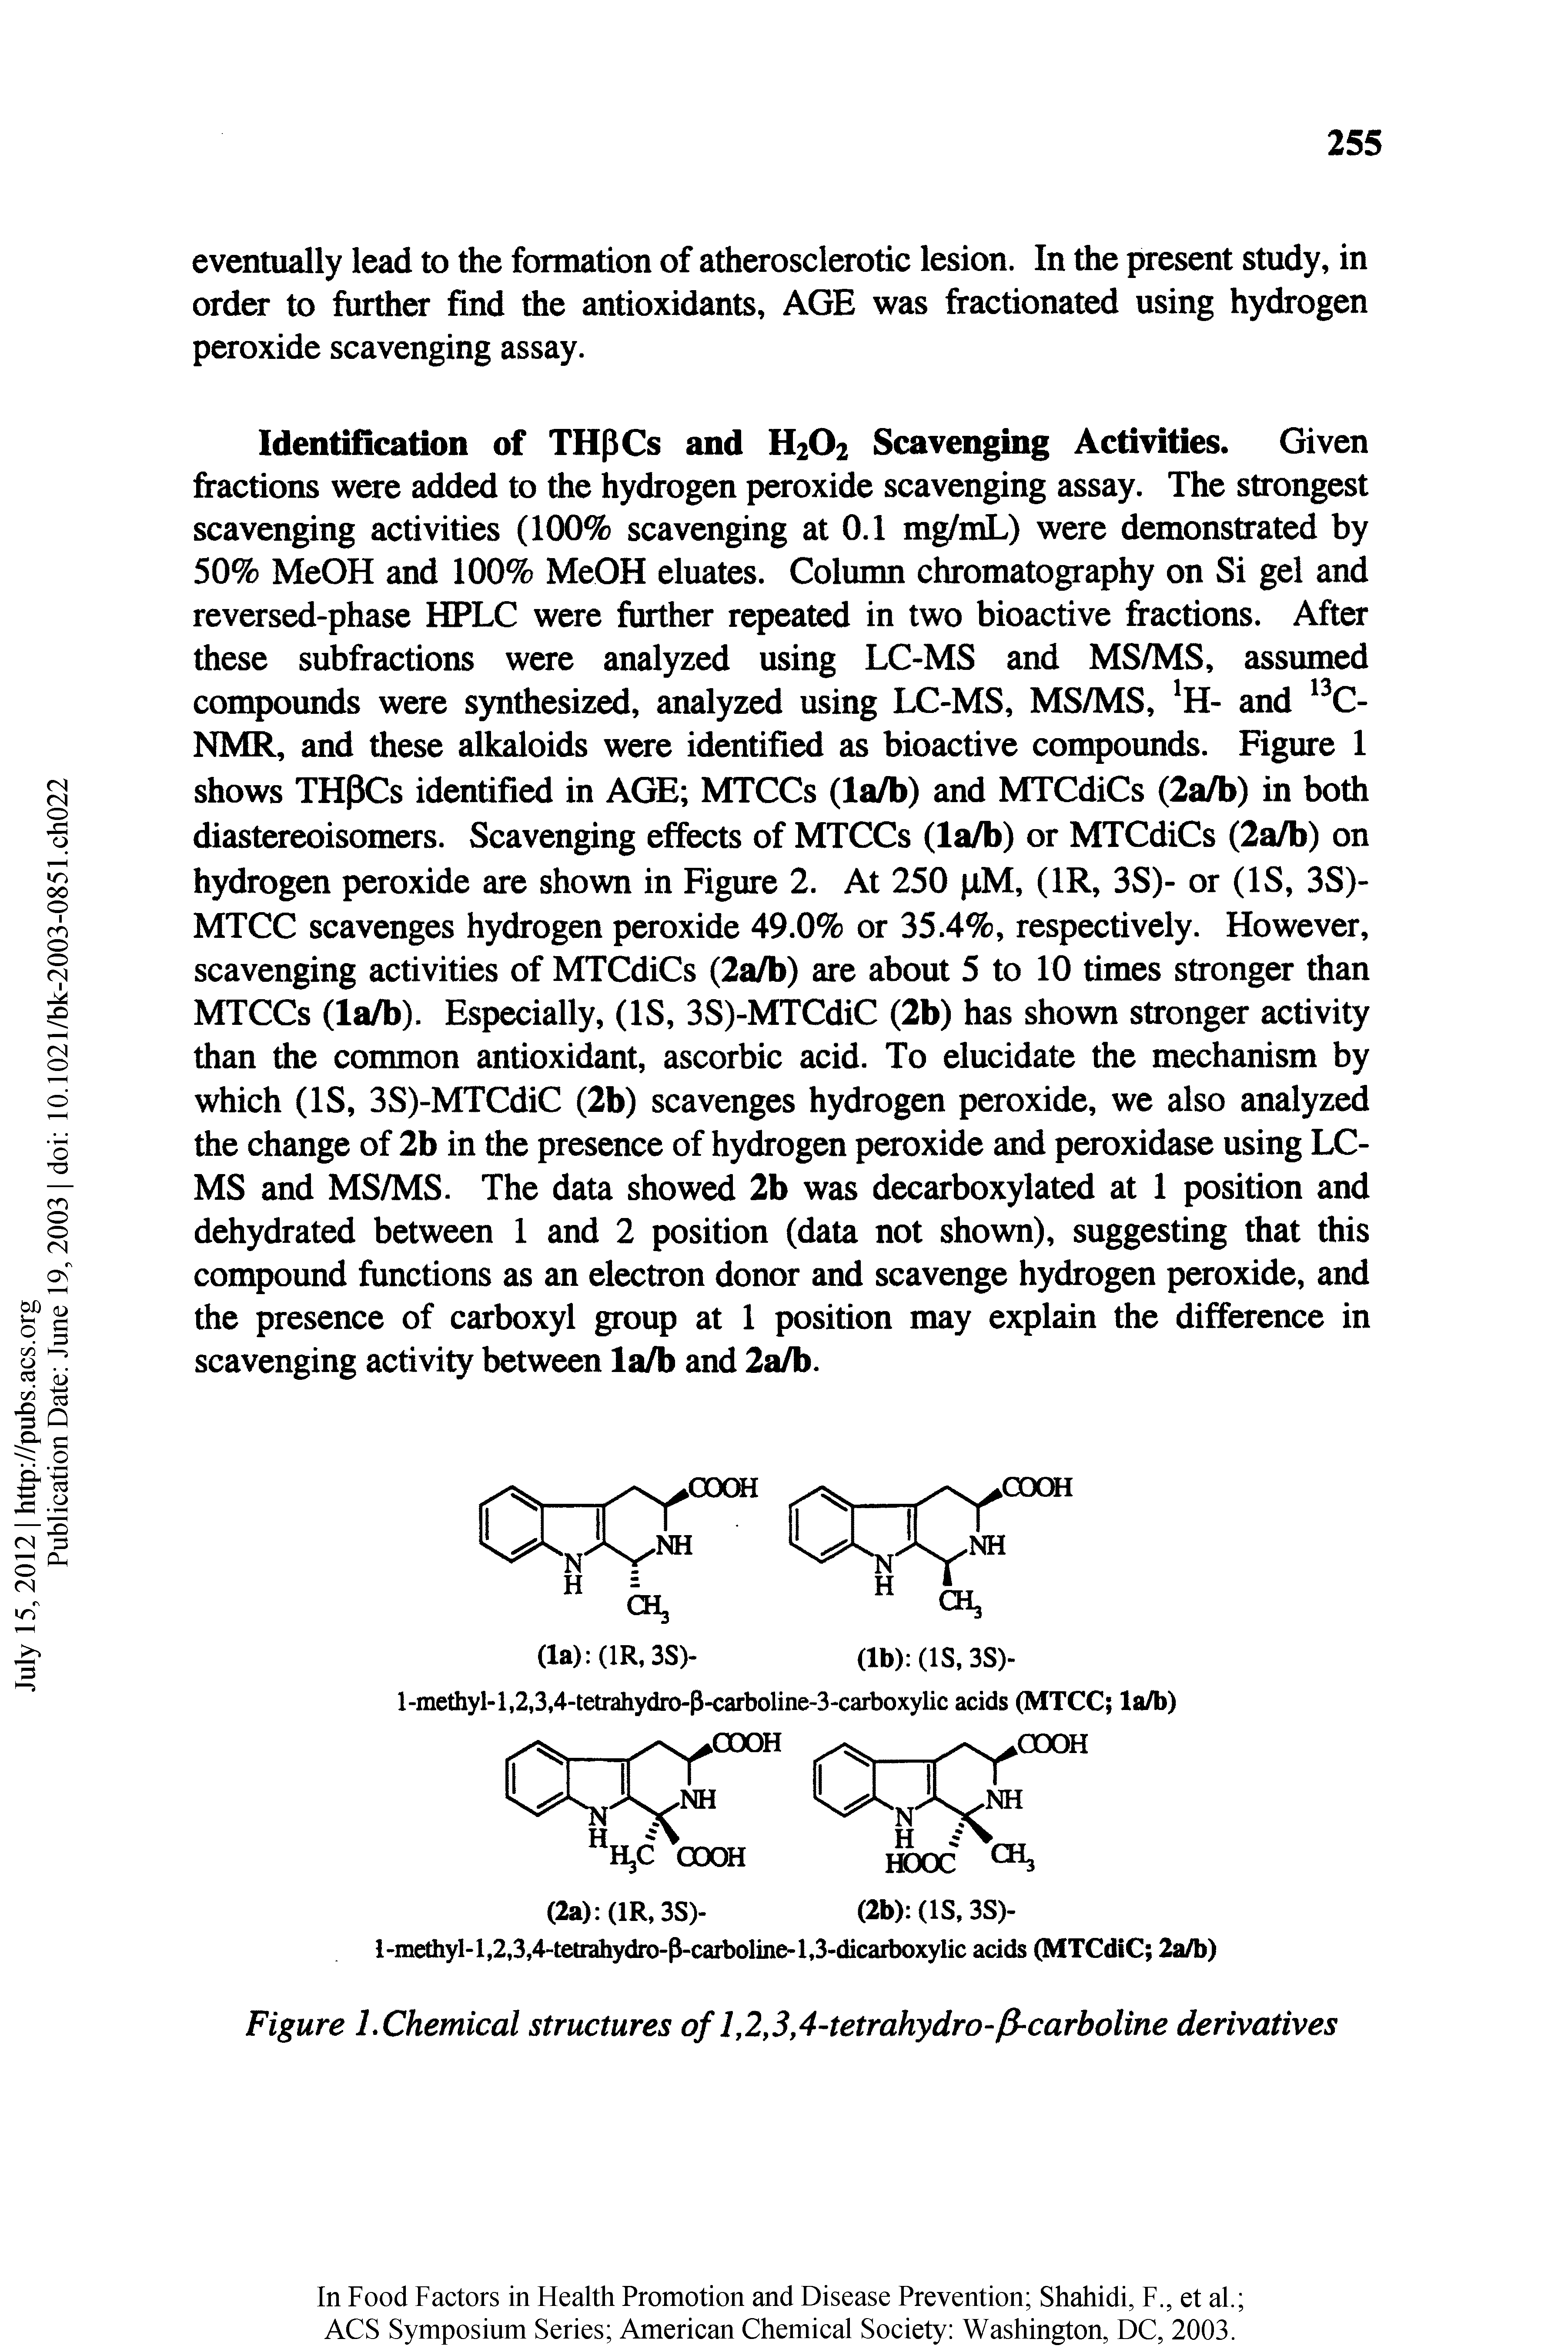 Figure 1. Chemical structures of 1,2,3,4-tetrahydro-fi-carboline derivatives...